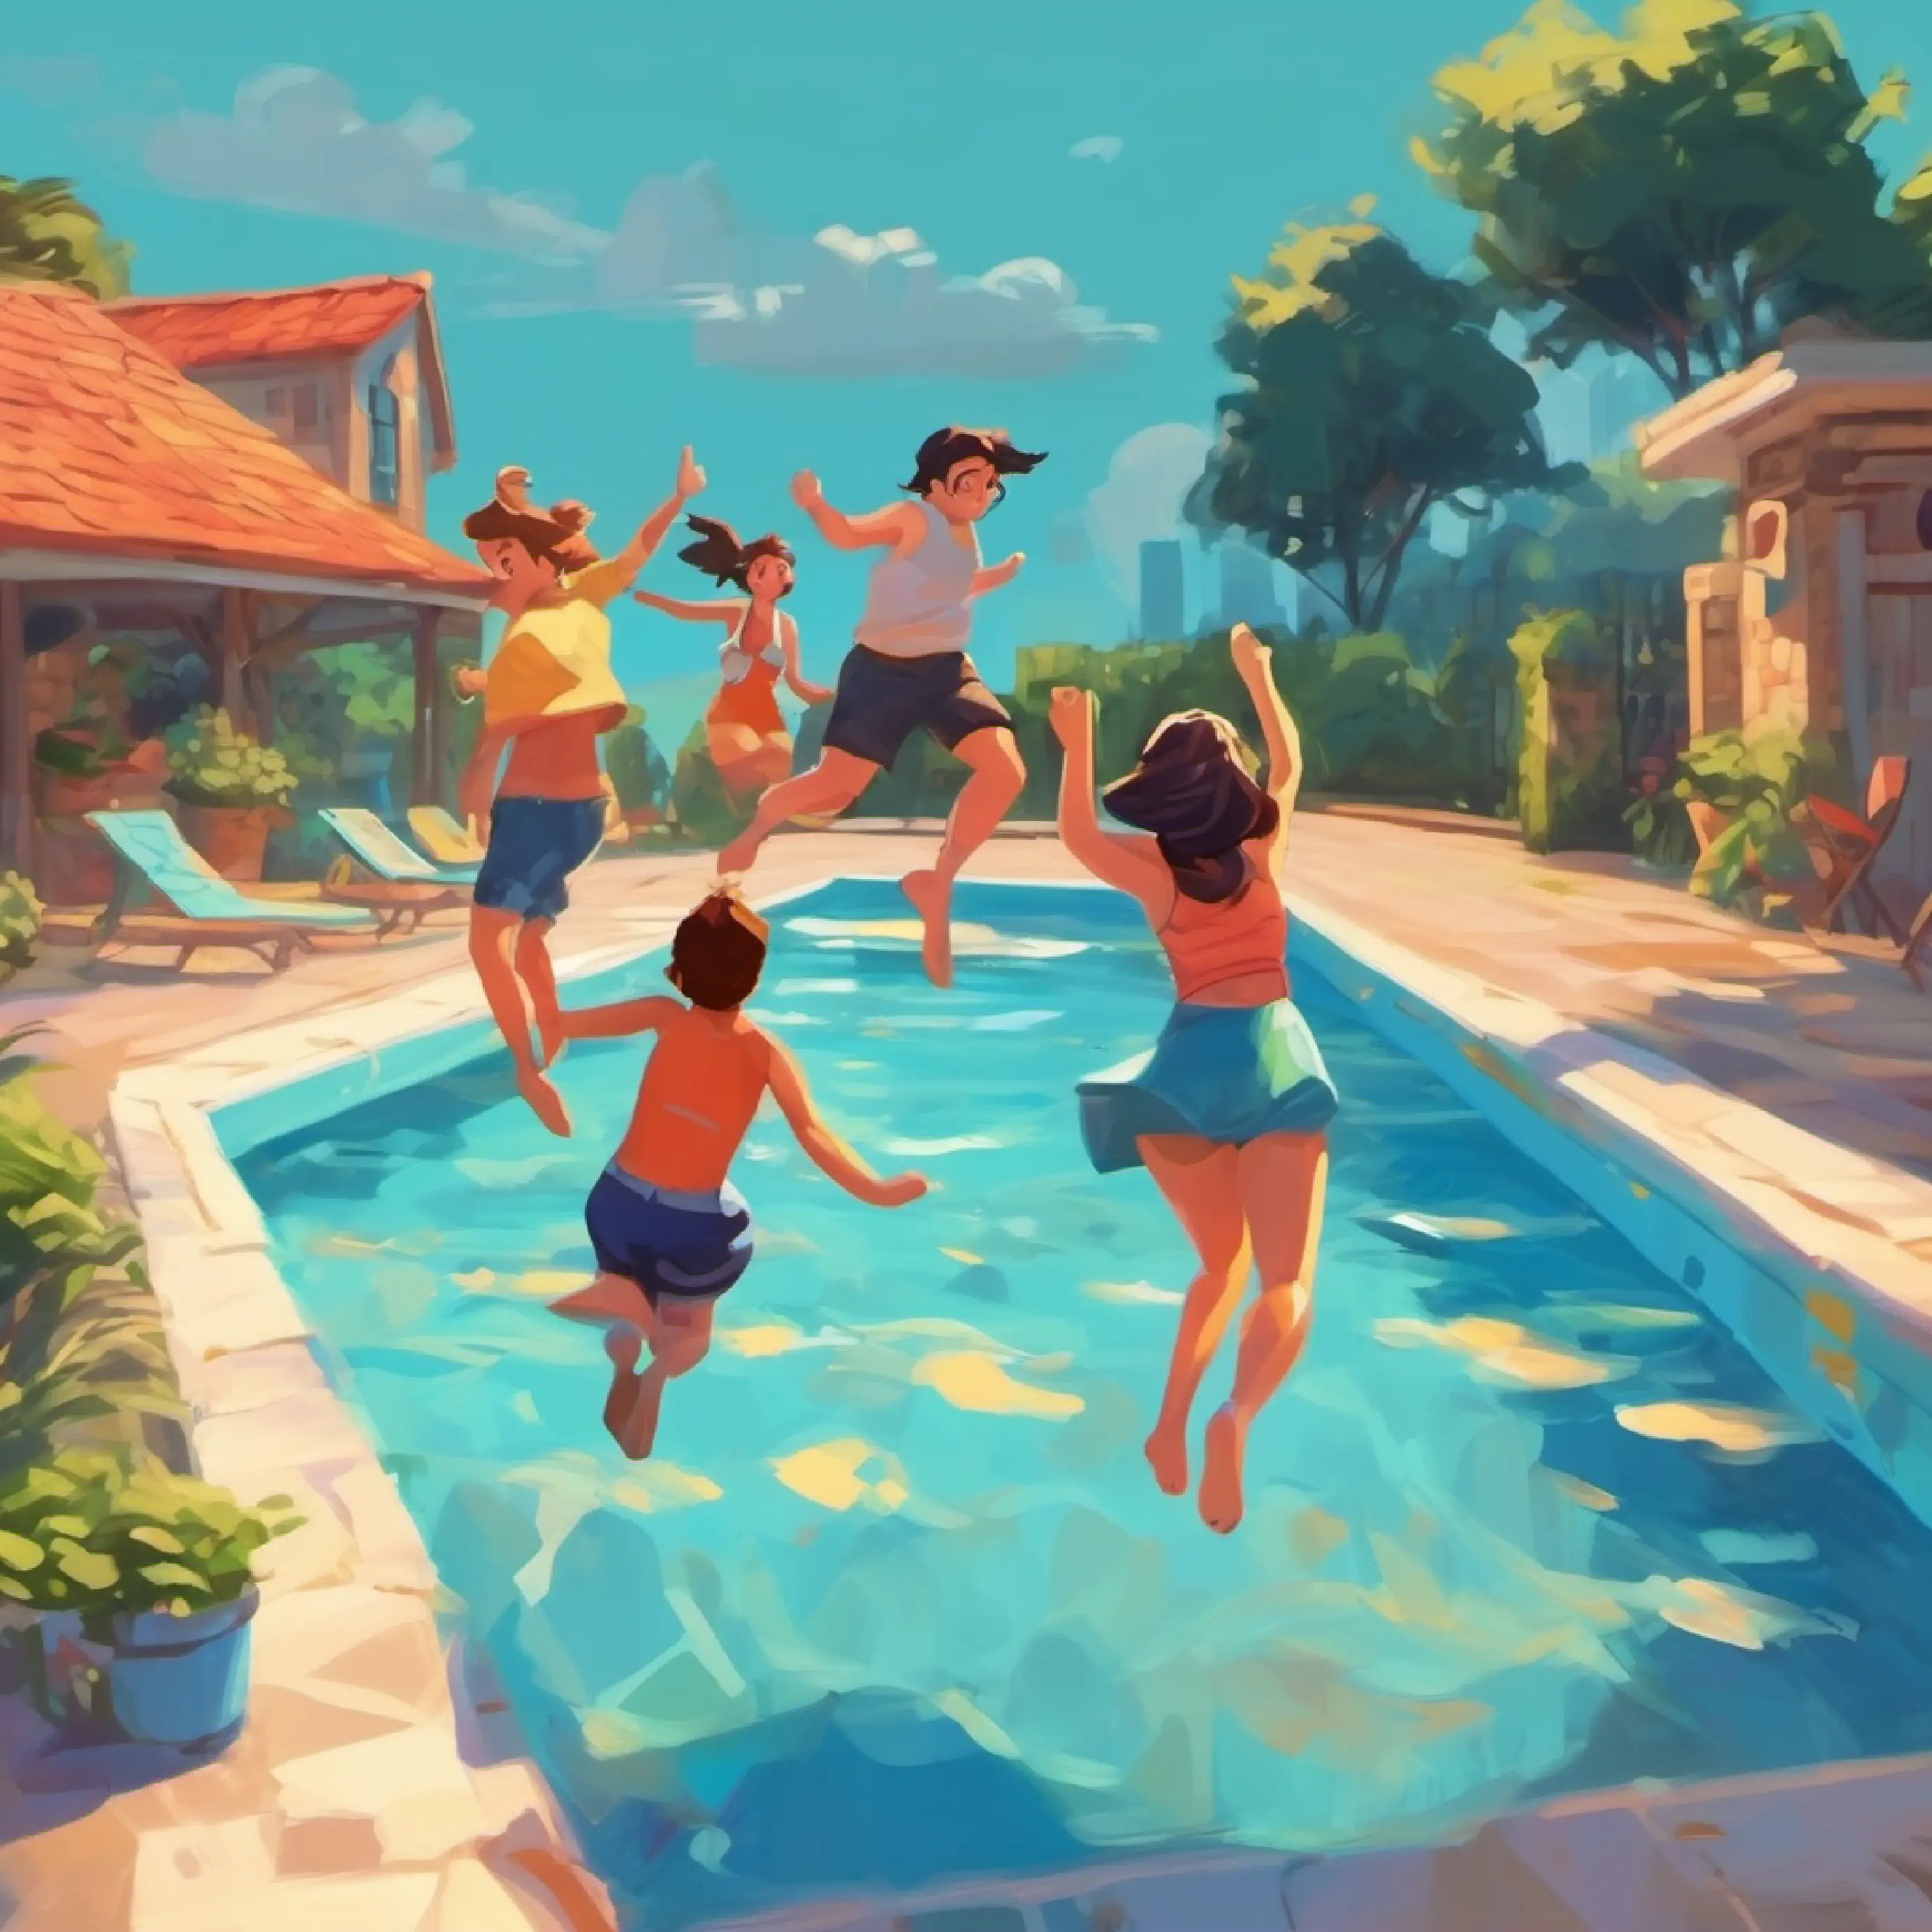 Friends jumping into the pool.